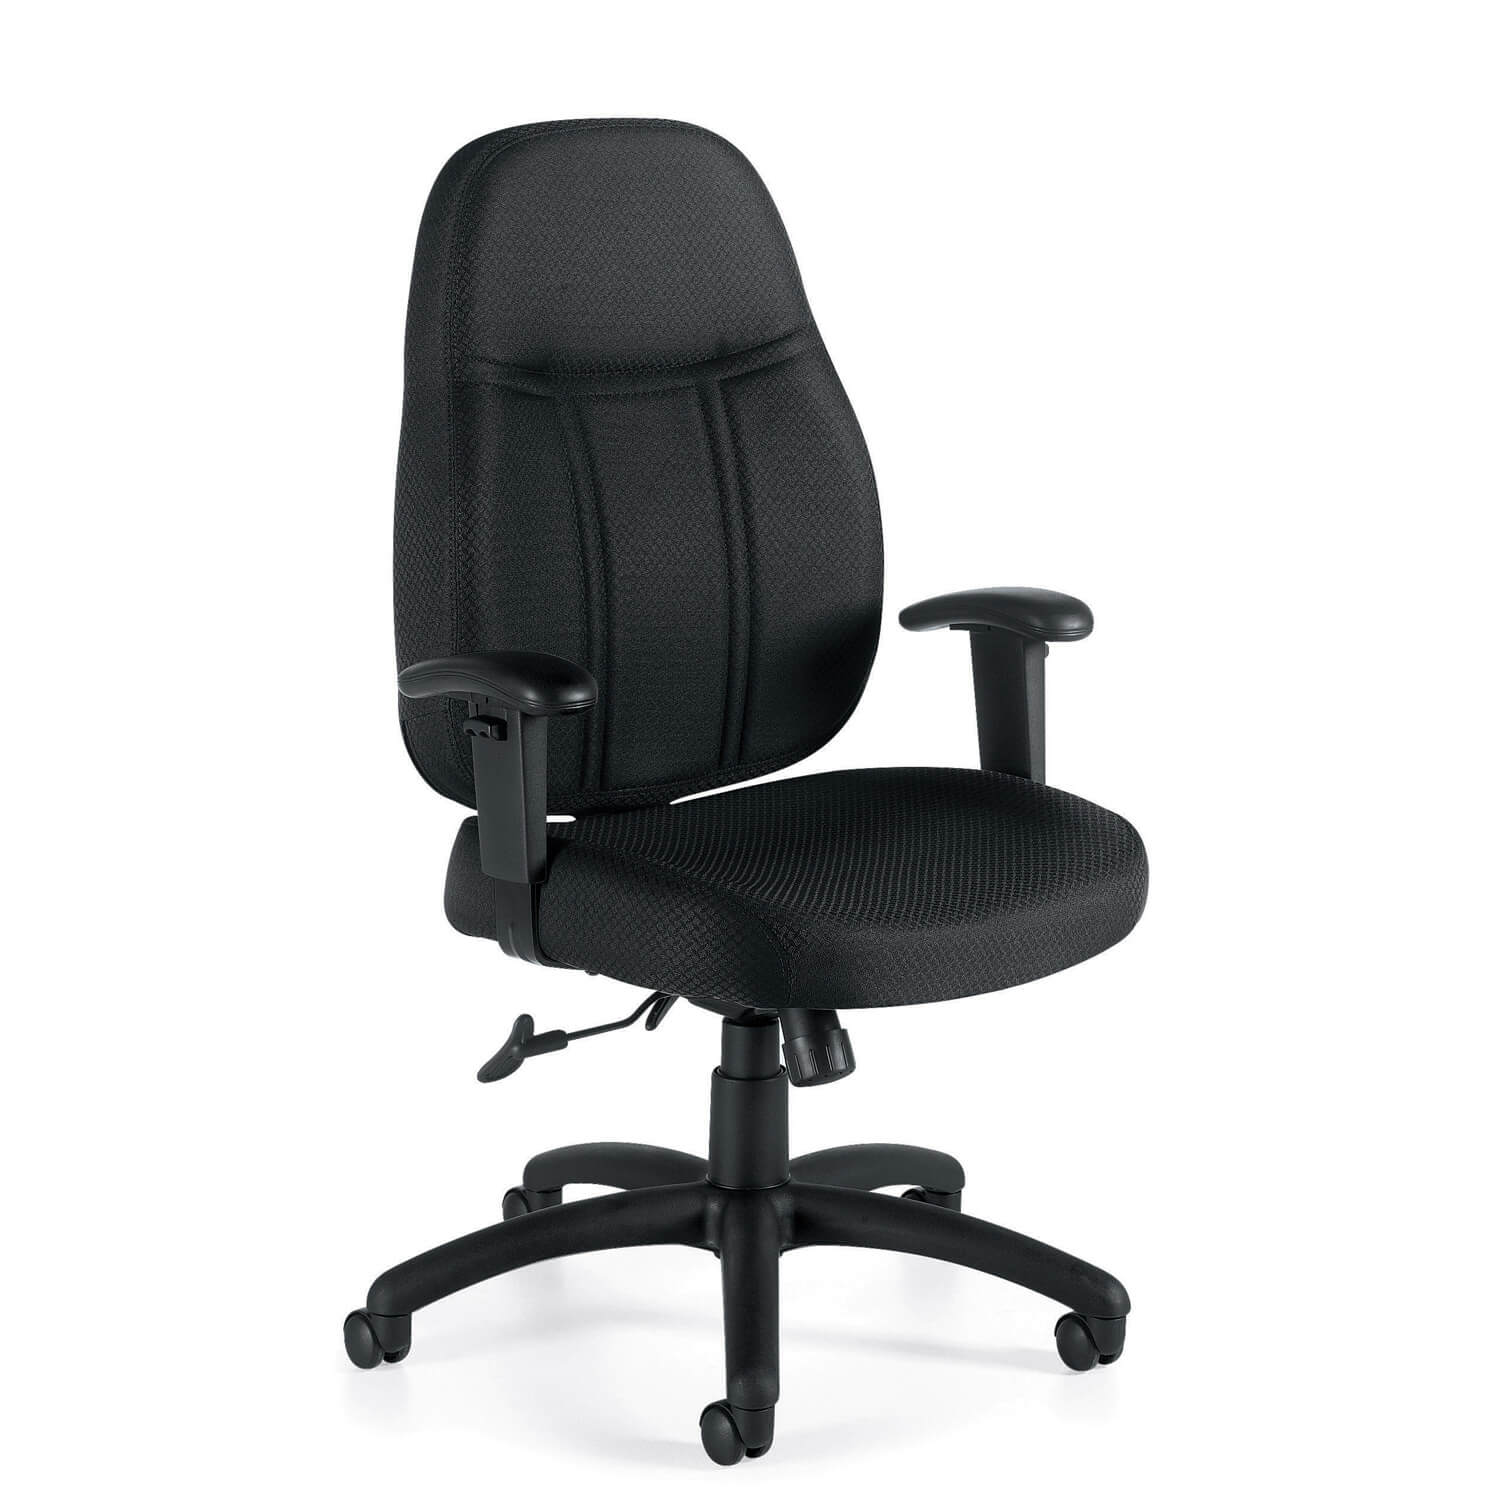 office-furniture-chairs-adjustable-office-chair.jpg